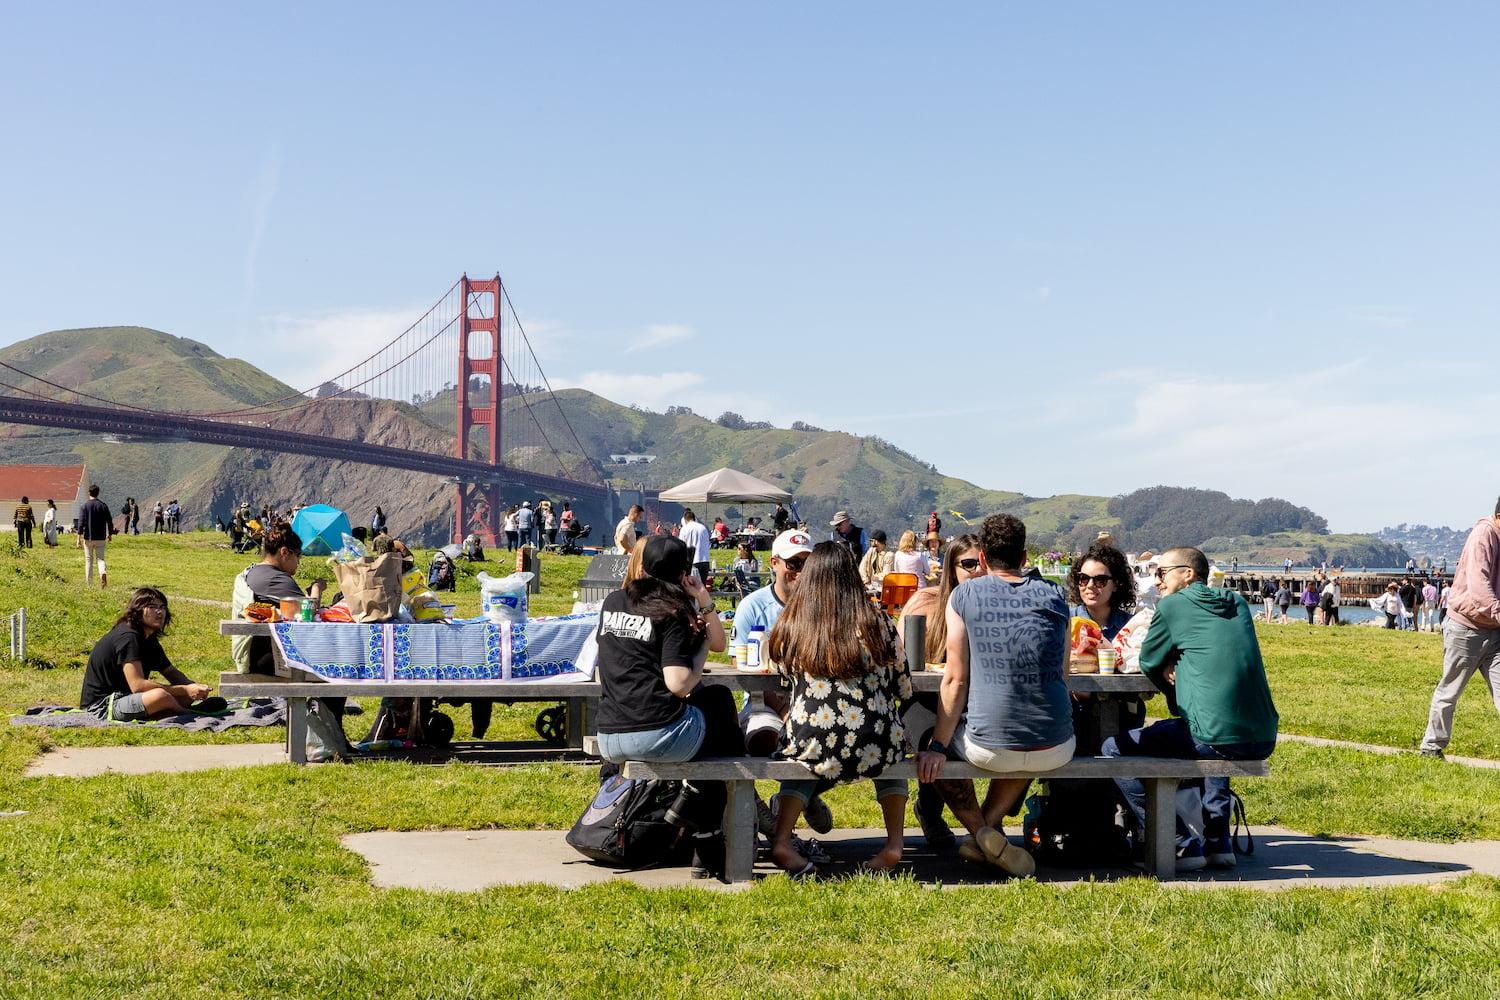 Visitors picnicking at Crissy Field West Bluffs with the Golden Gate Bridge in the background.